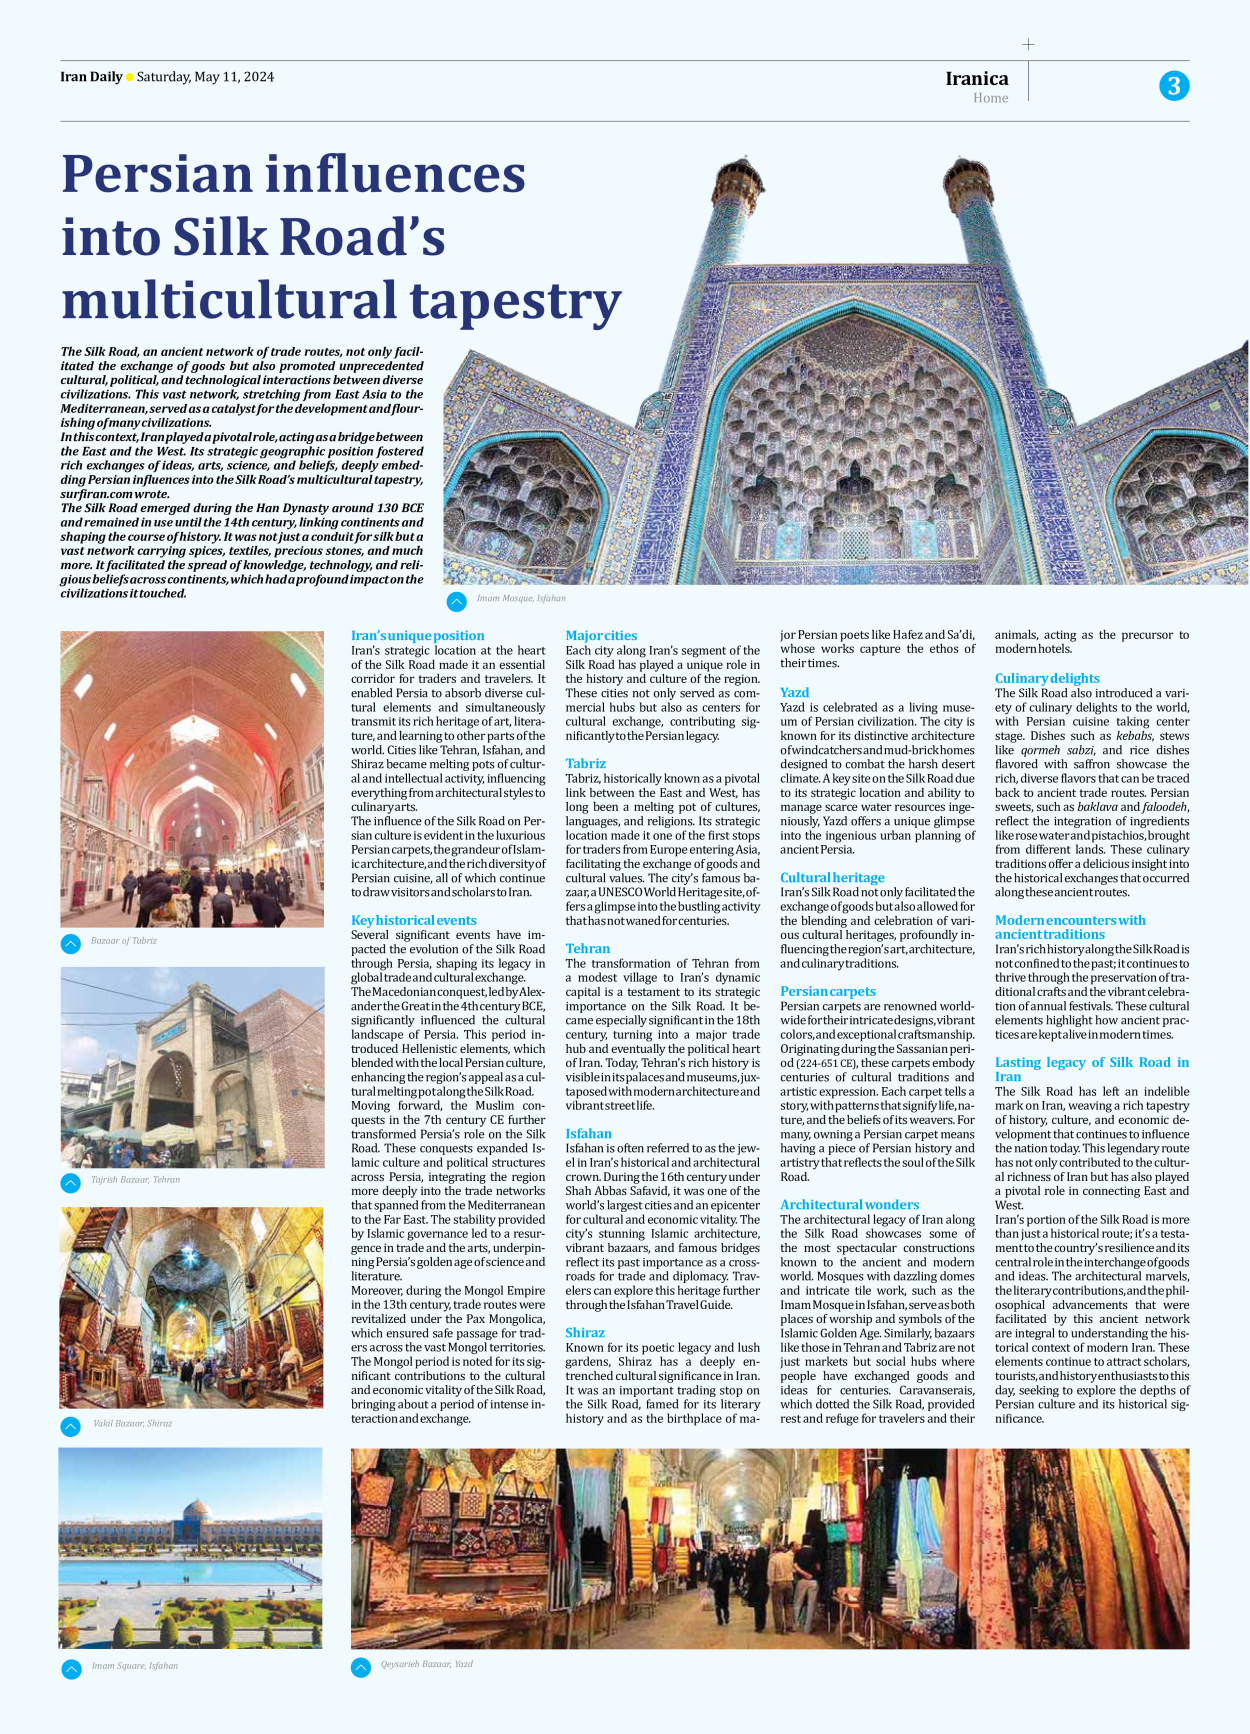 Iran Daily - Number Seven Thousand Five Hundred and Fifty Four - 11 May 2024 - Page 3